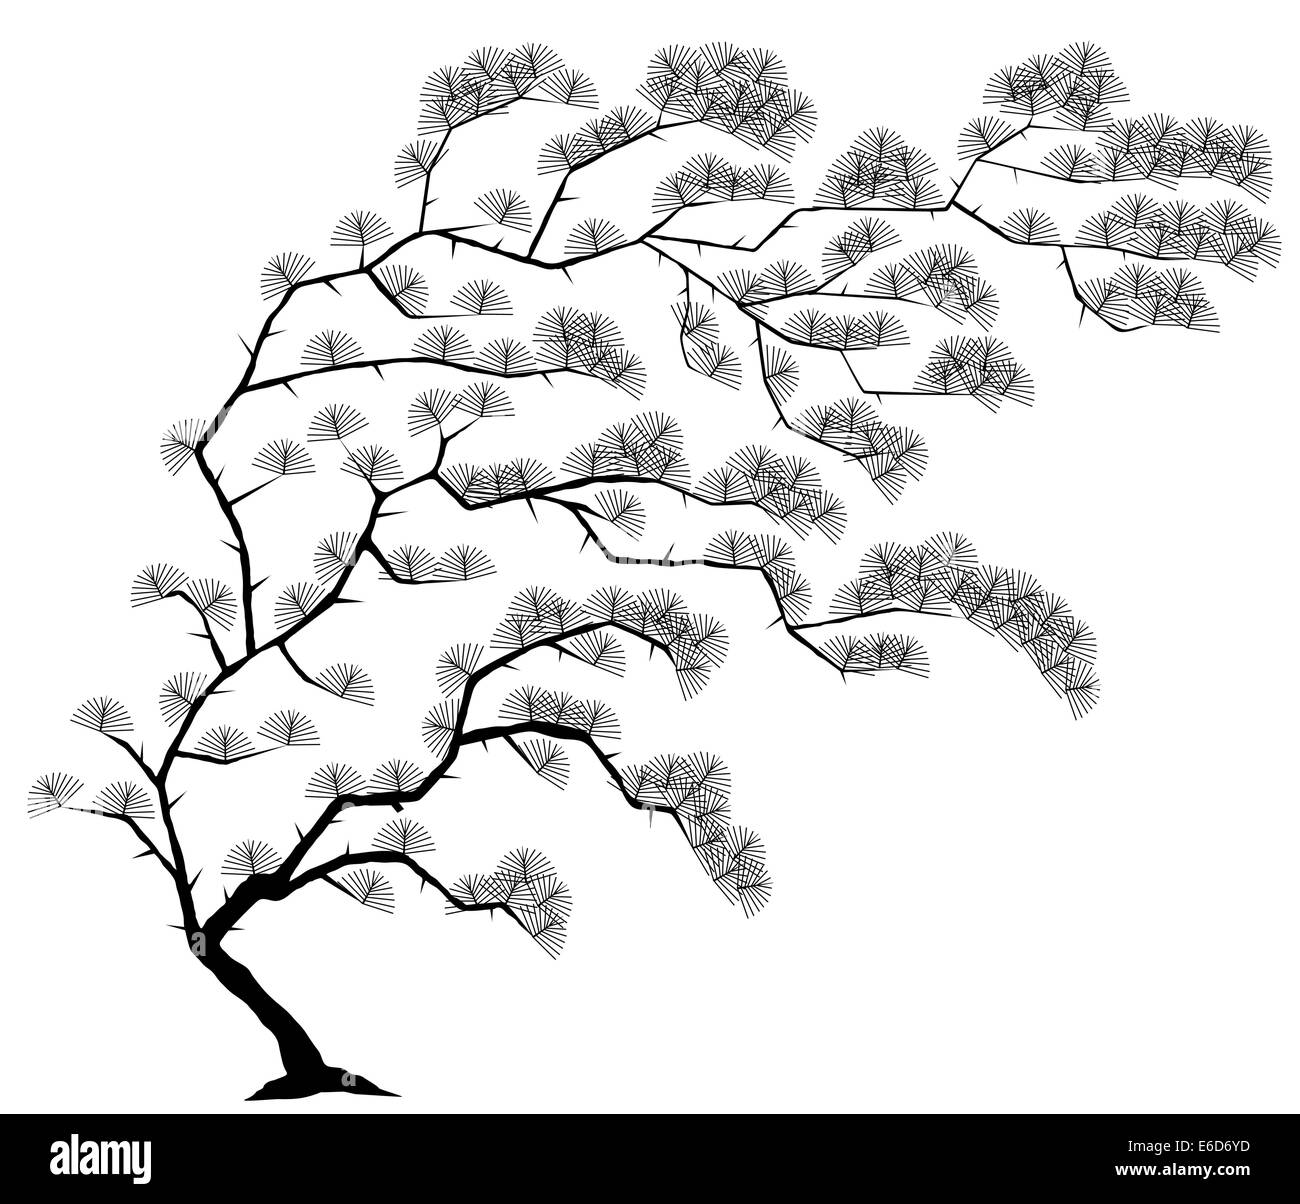 Editable vector illustration of a windblown tree with leaves as separate objects Stock Vector